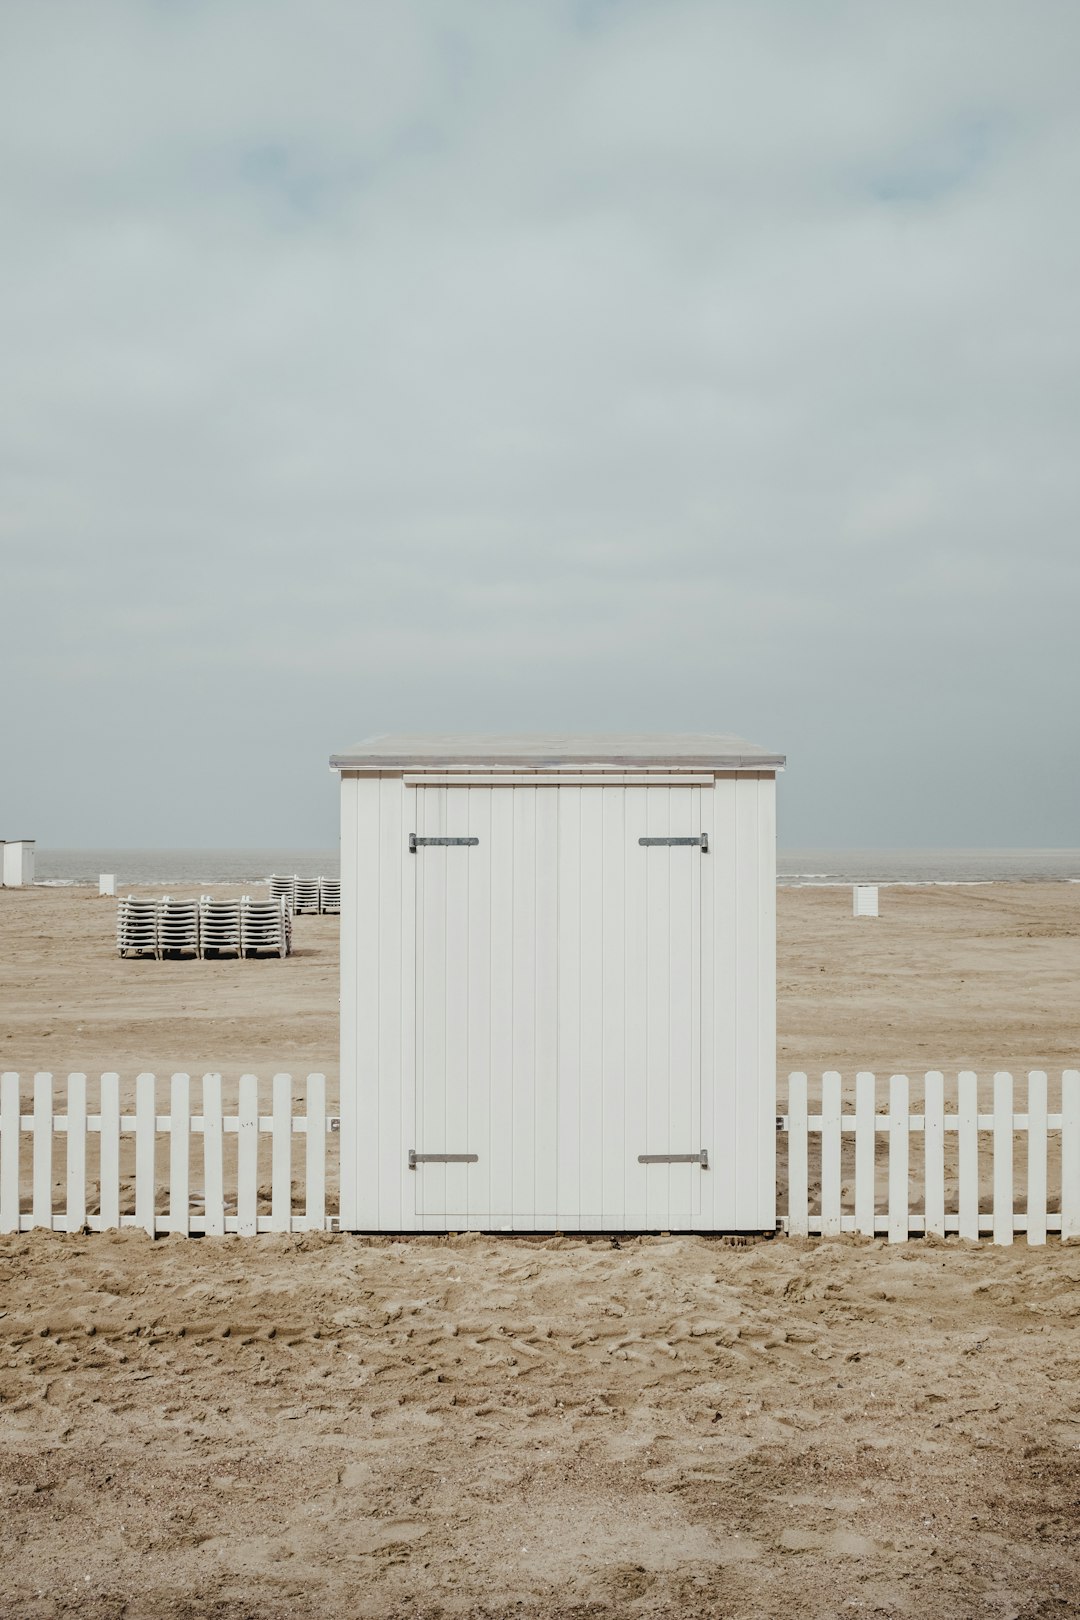 Travel Tips and Stories of Knokke in Belgium